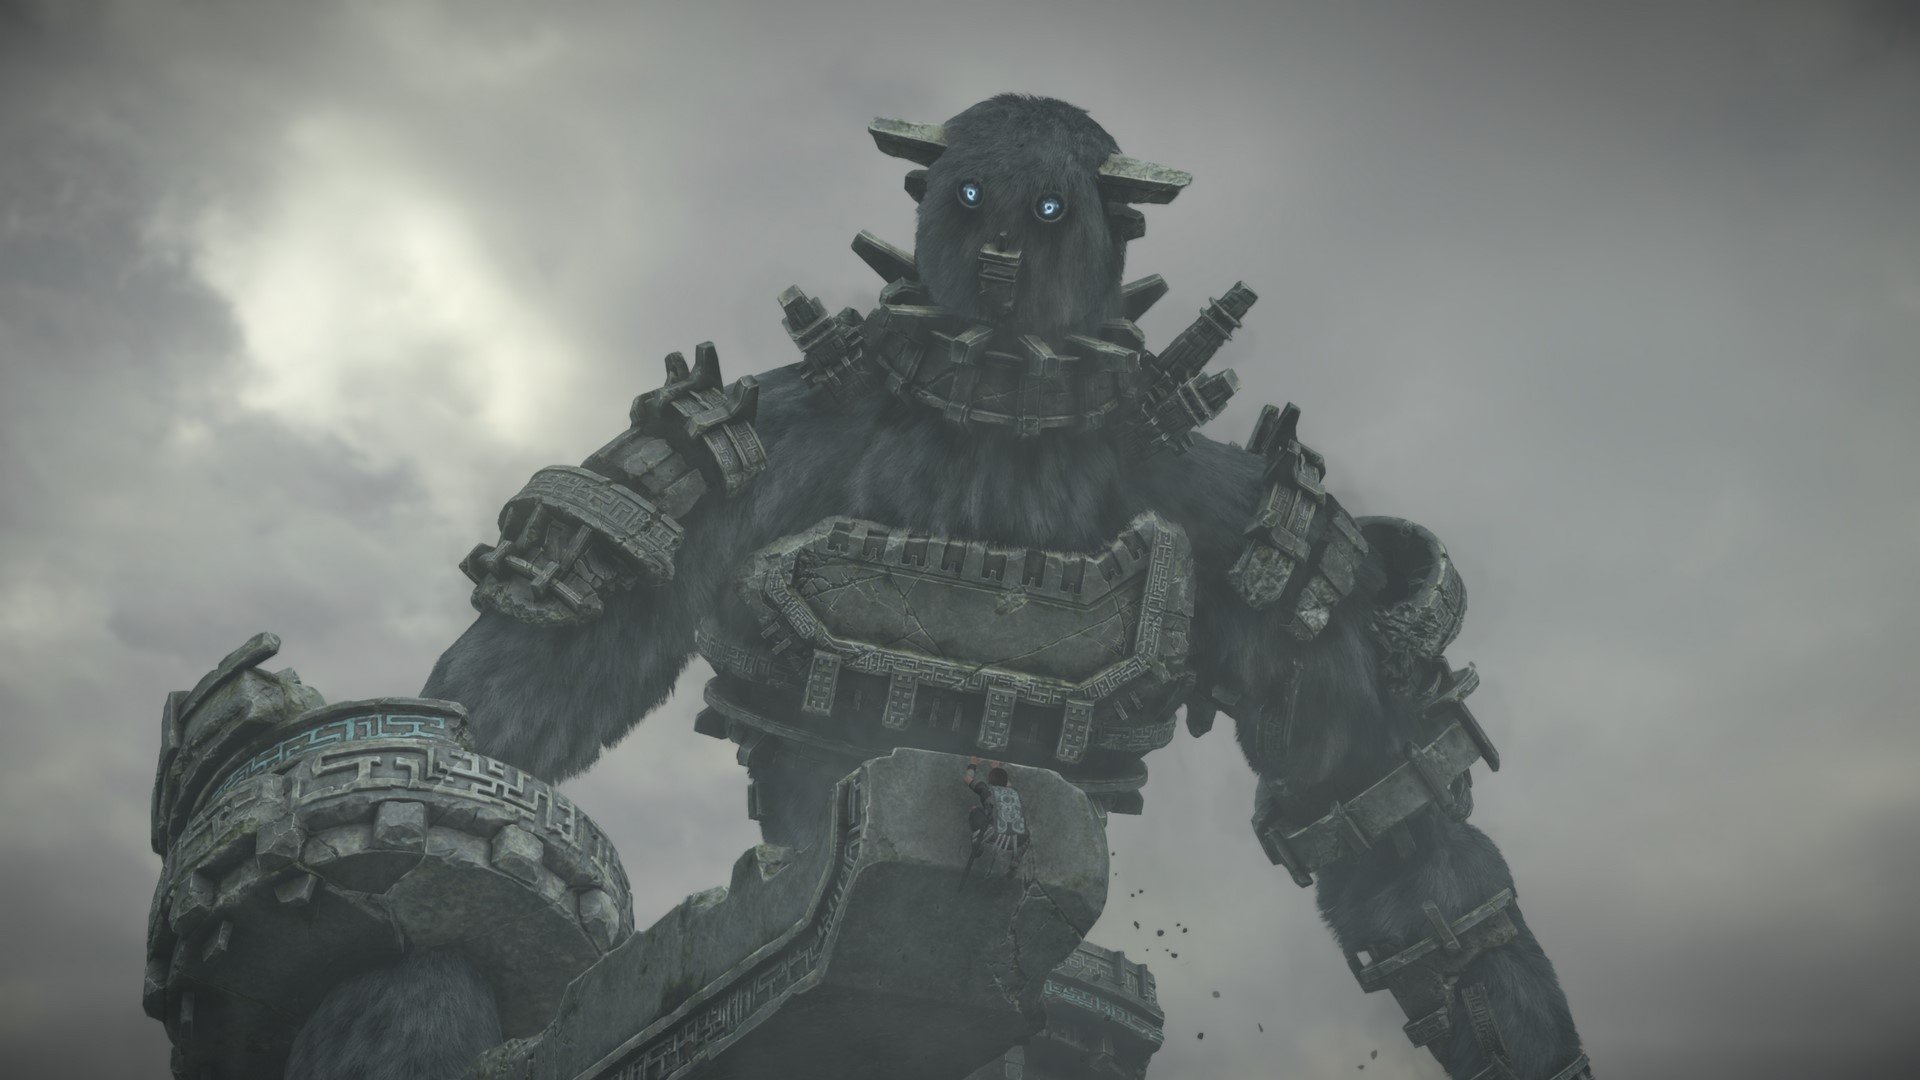 Shadow of The Colossus – PS4 ǀ Review